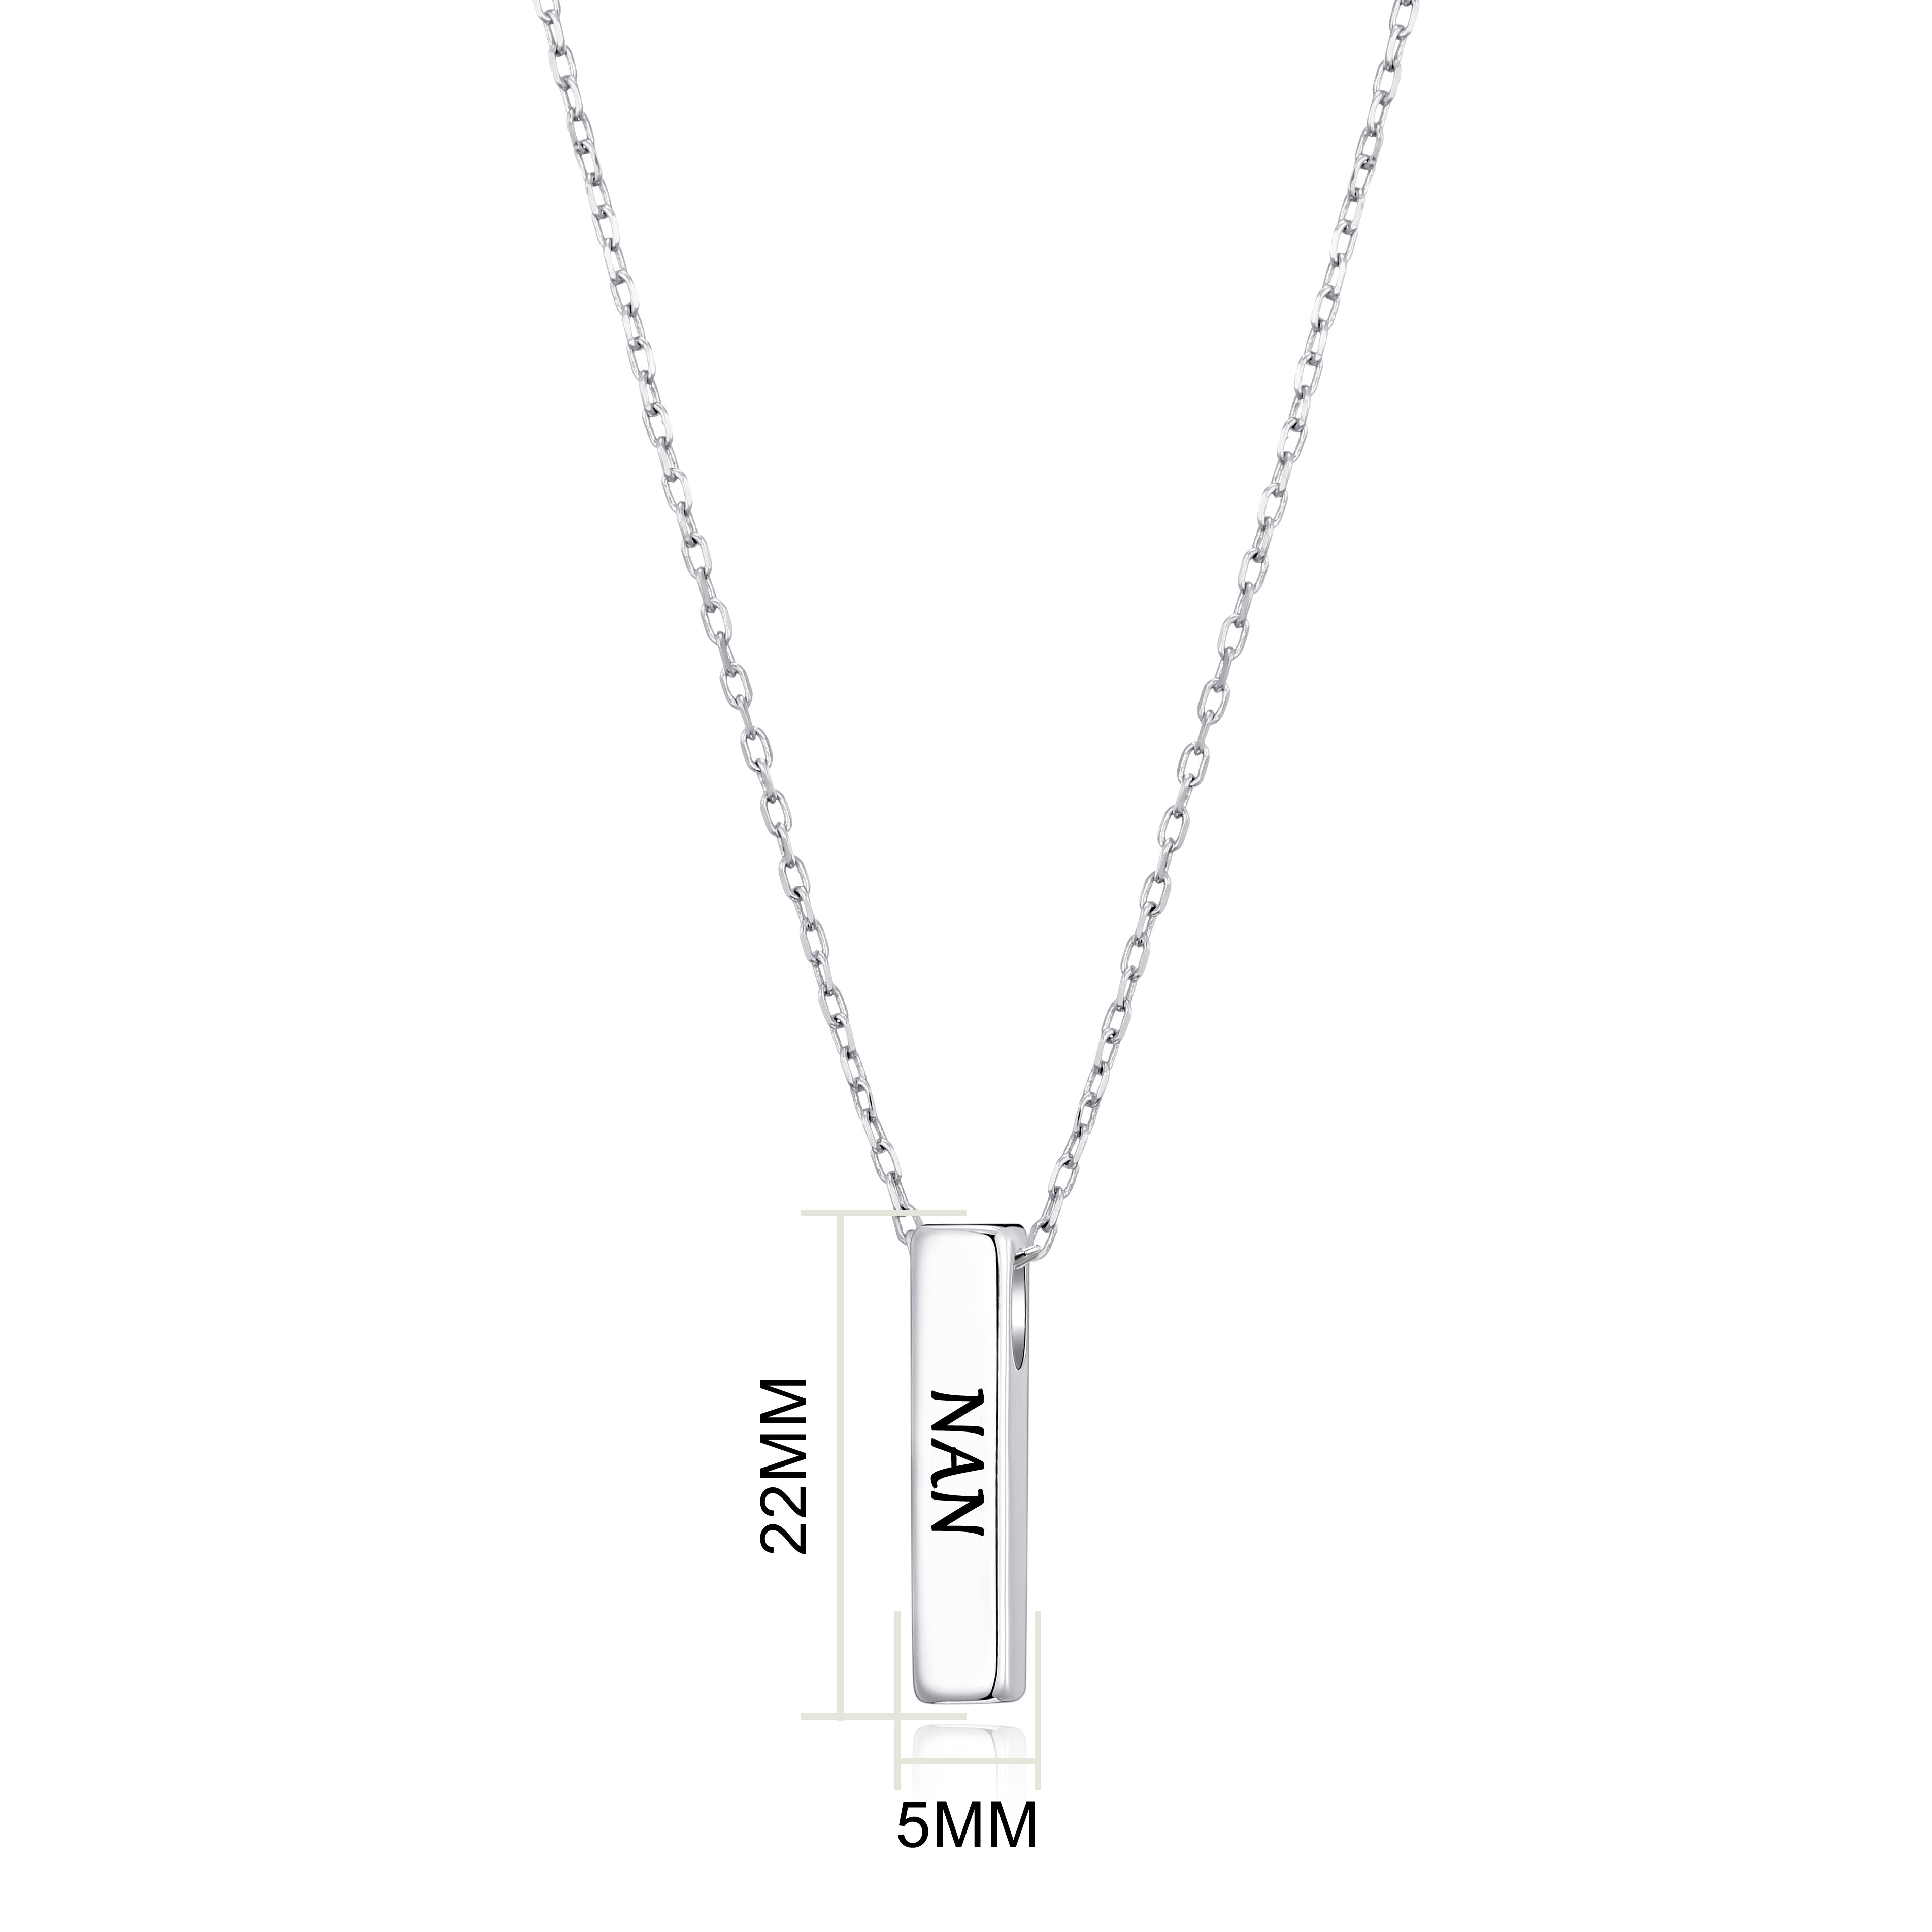 Silver Plated Nan Bar Necklace